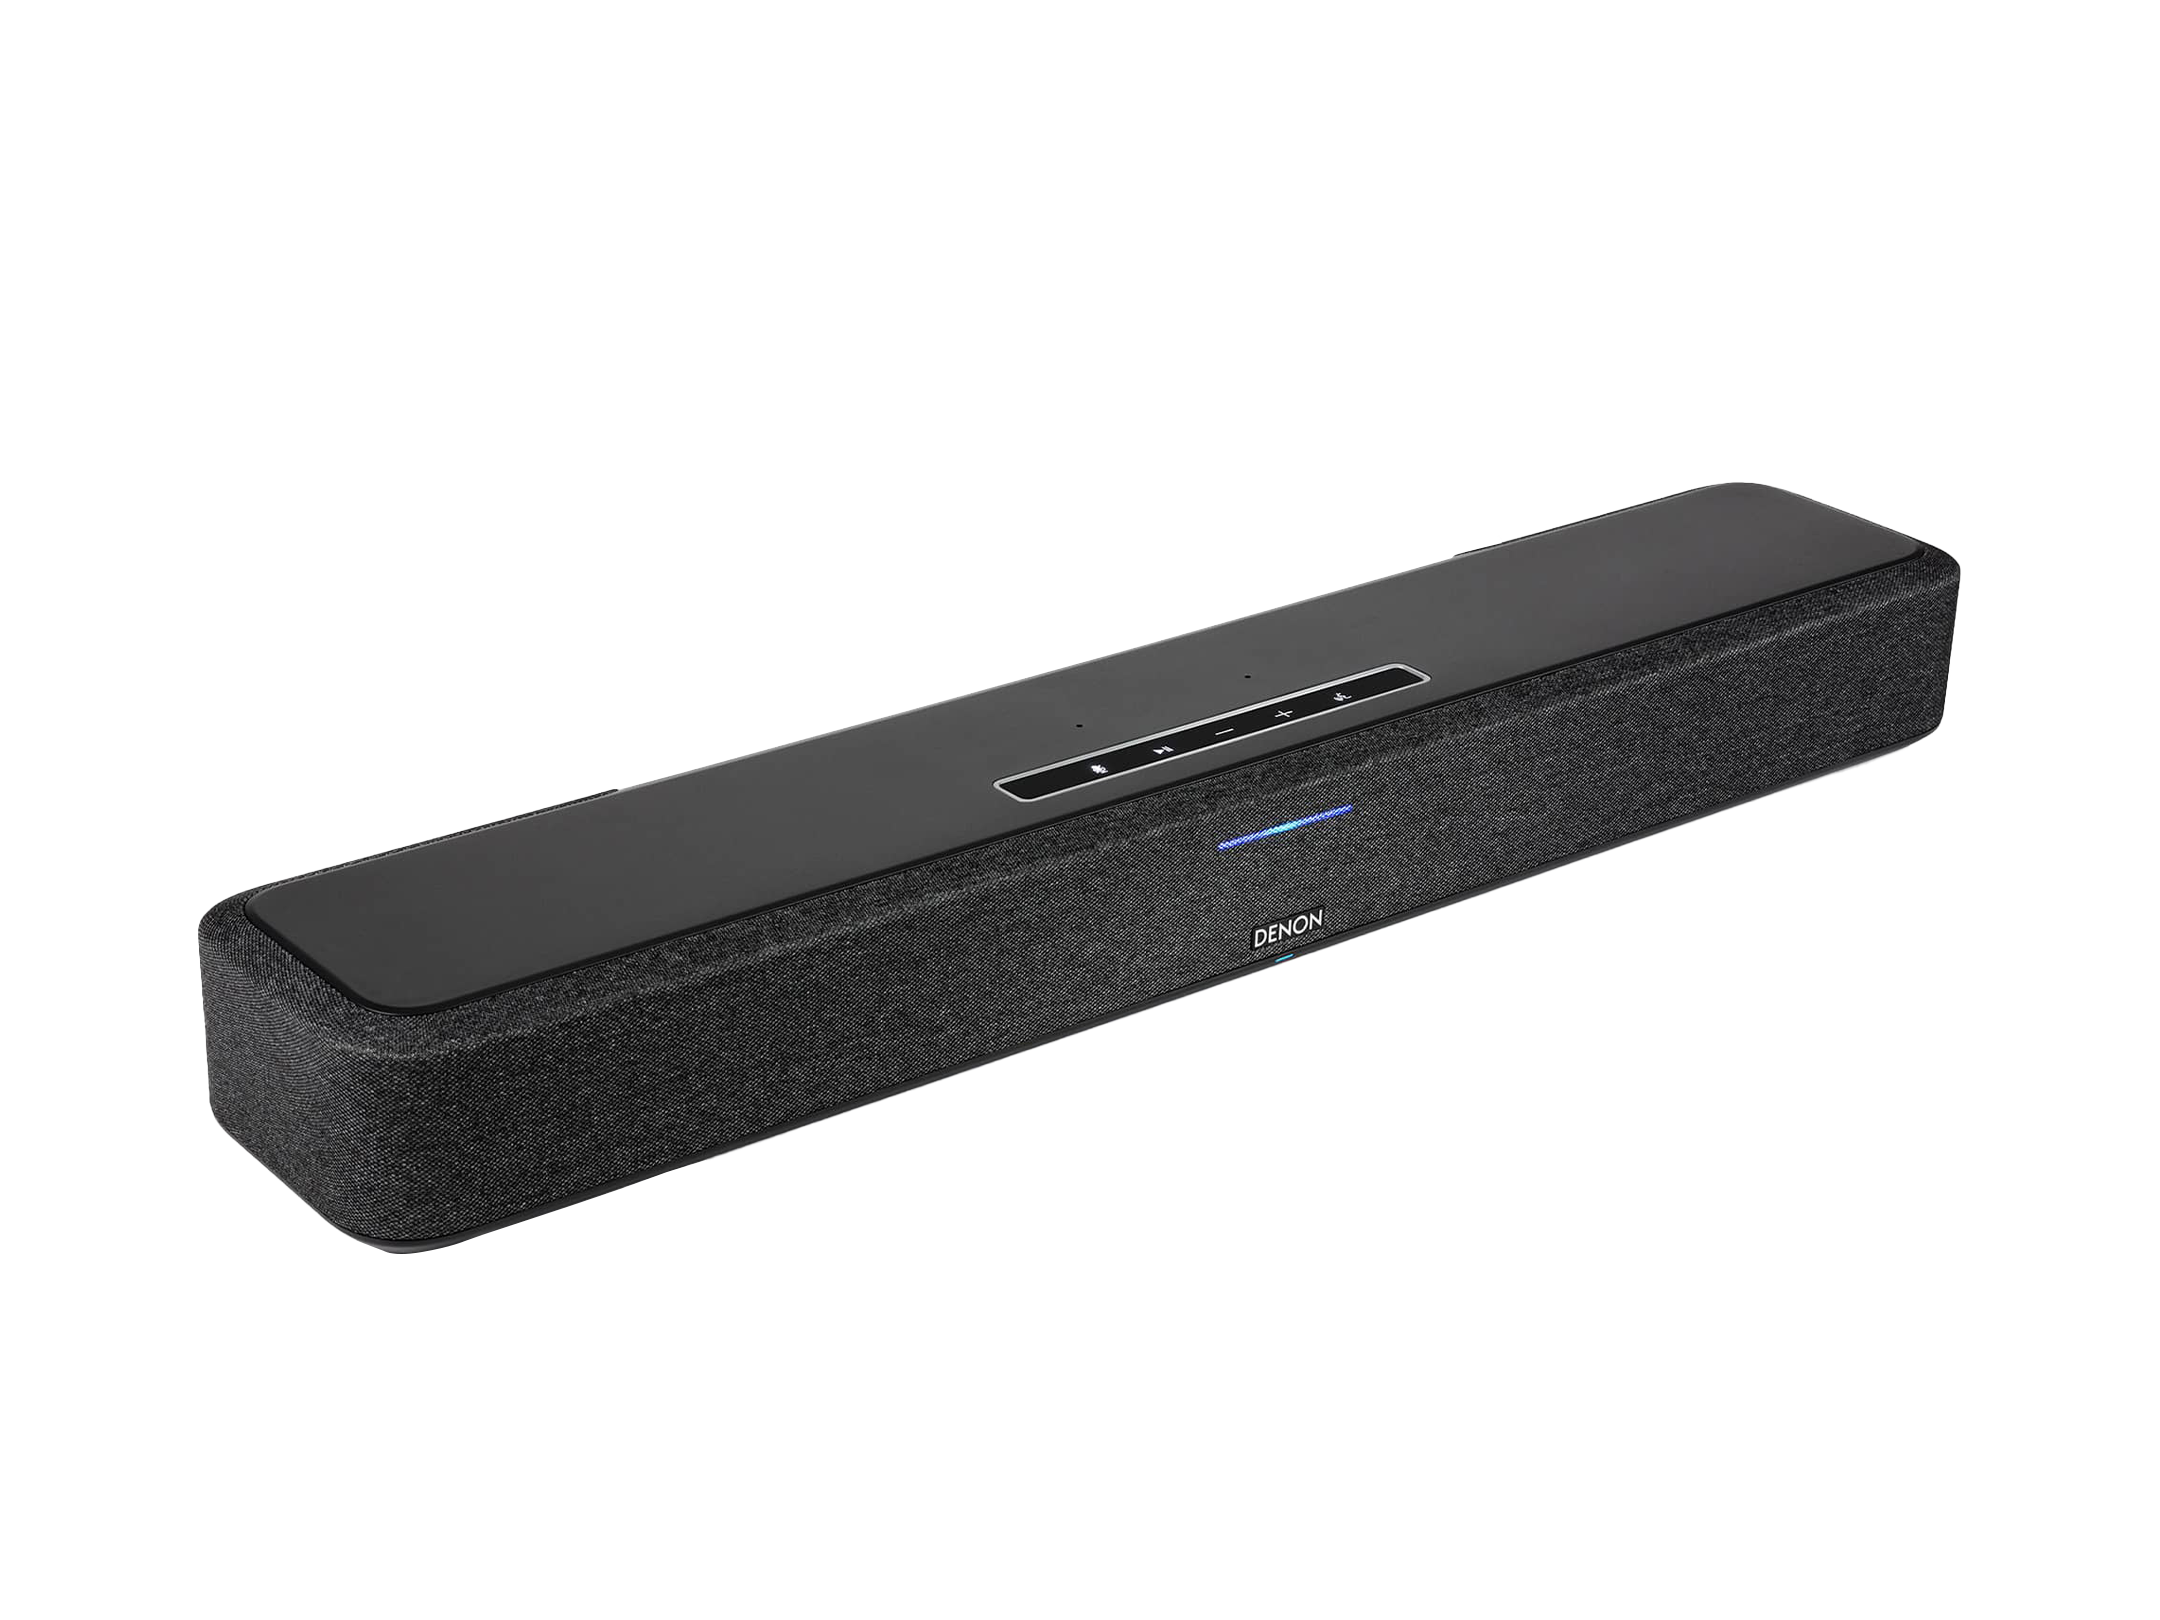 Denon Sound Bar - Smart Sound Bar with Dolby and HEOS® Built-in | Denon - US